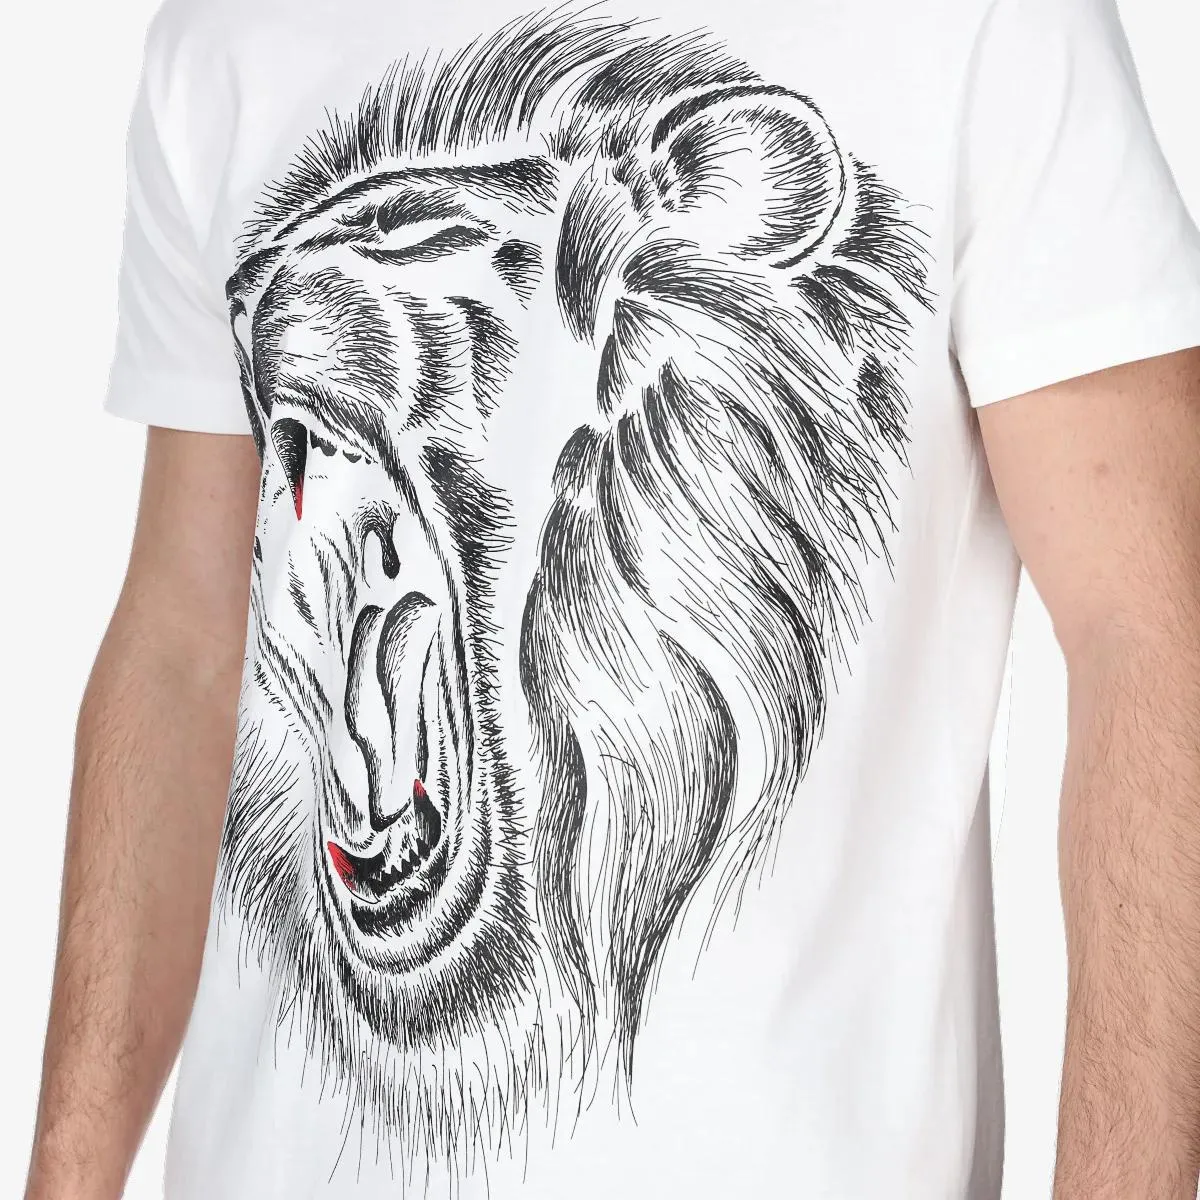 Lonsdale T-shirt LION TEE 